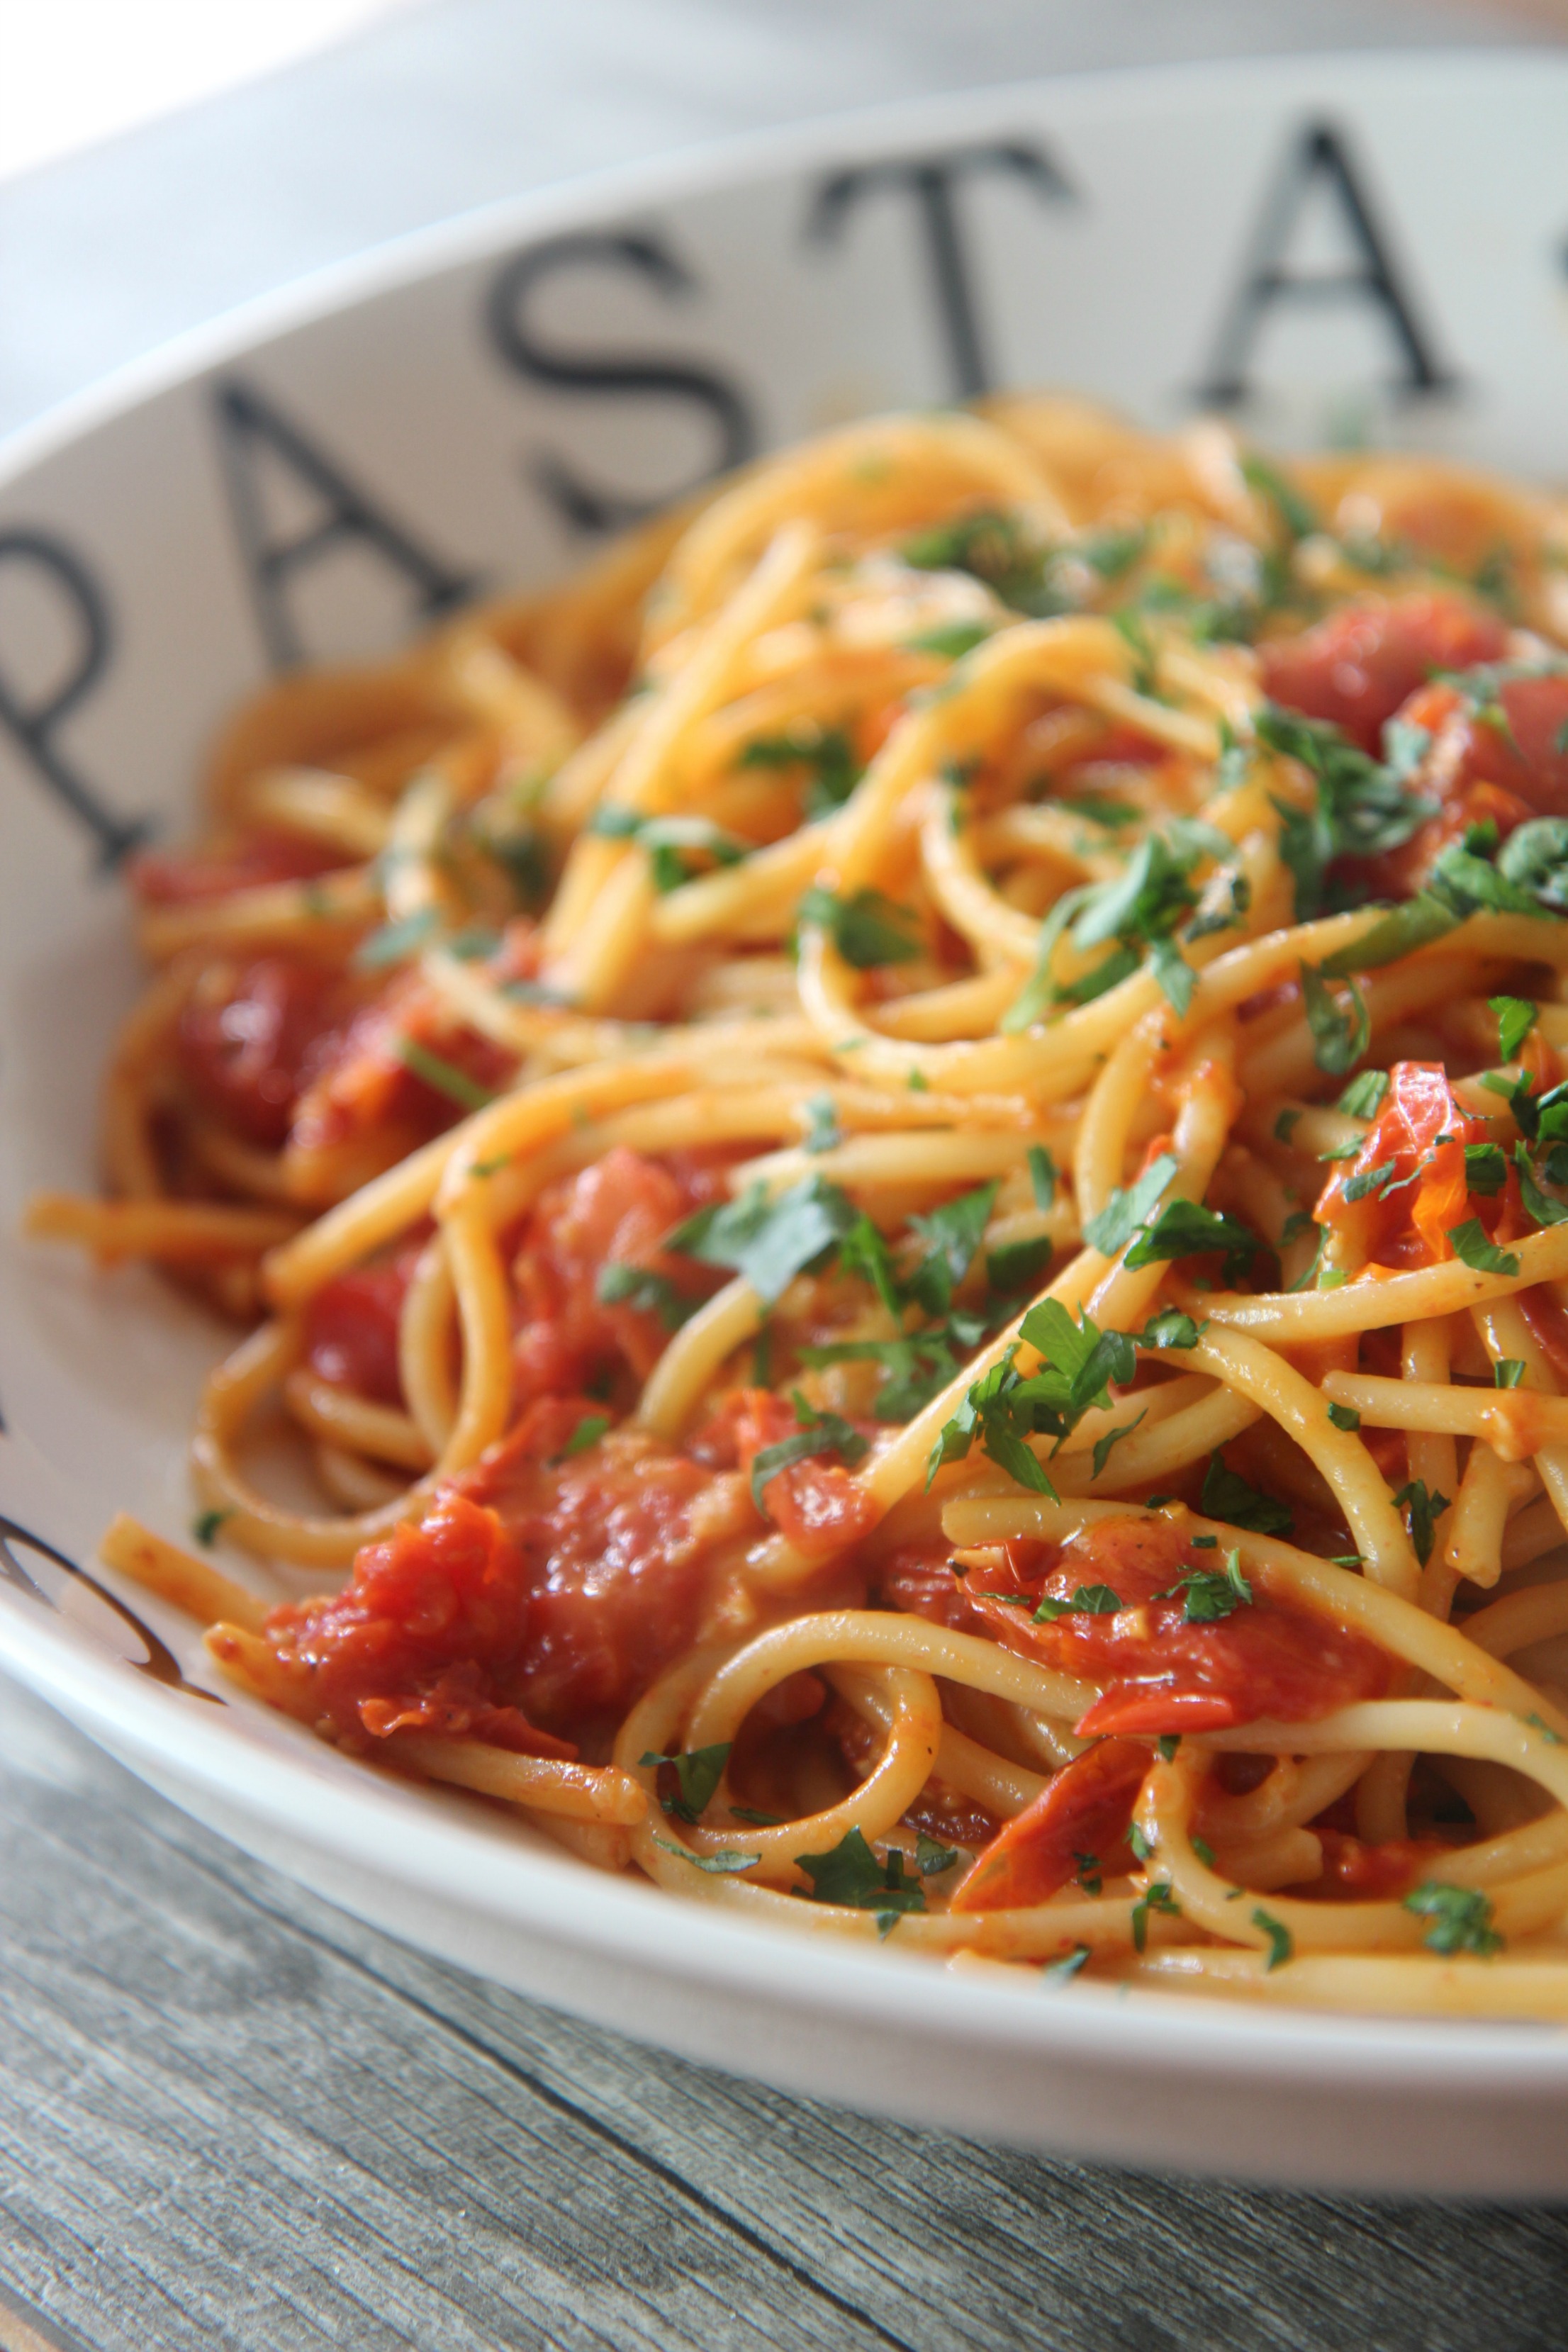 Tender angel hair pasta coasted in freshly roasted tomatoes and topped with parmesan cheese